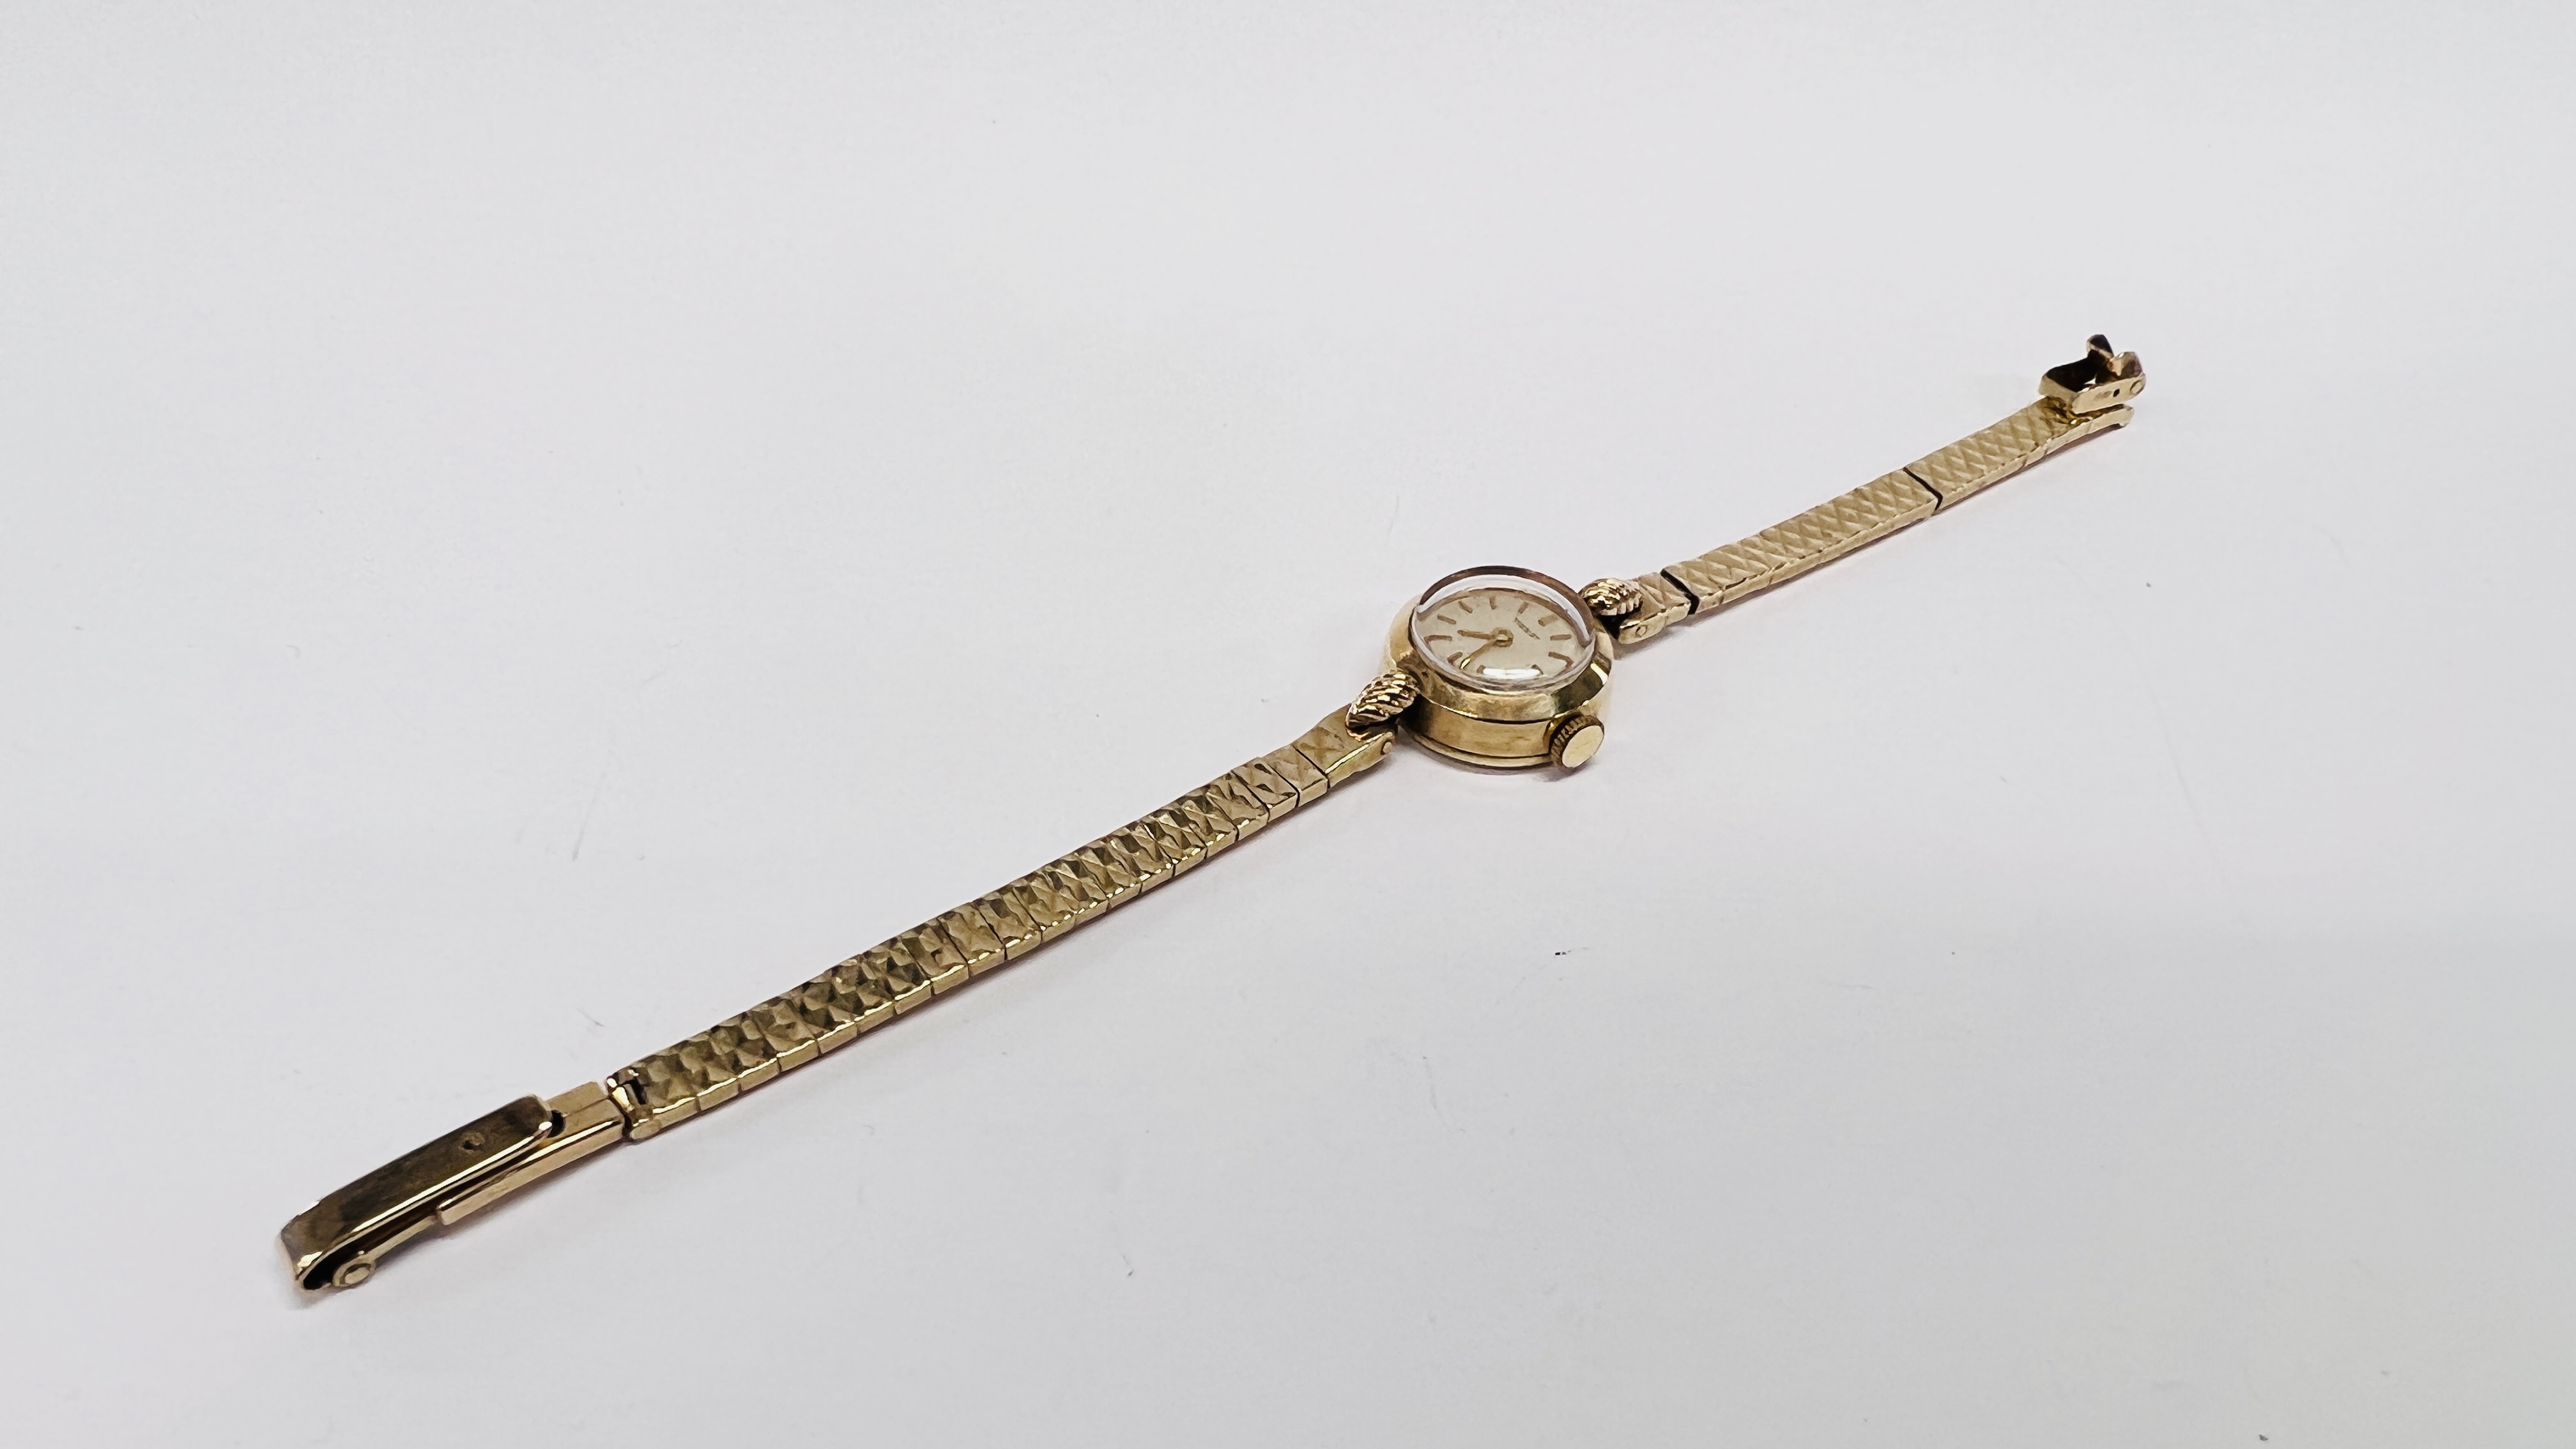 A LADY'S 9CT GOLD TISSOT WRISTWATCH WITH BATON NUMERALS, ON A 9CT GOLD BRACELET. - Image 2 of 13